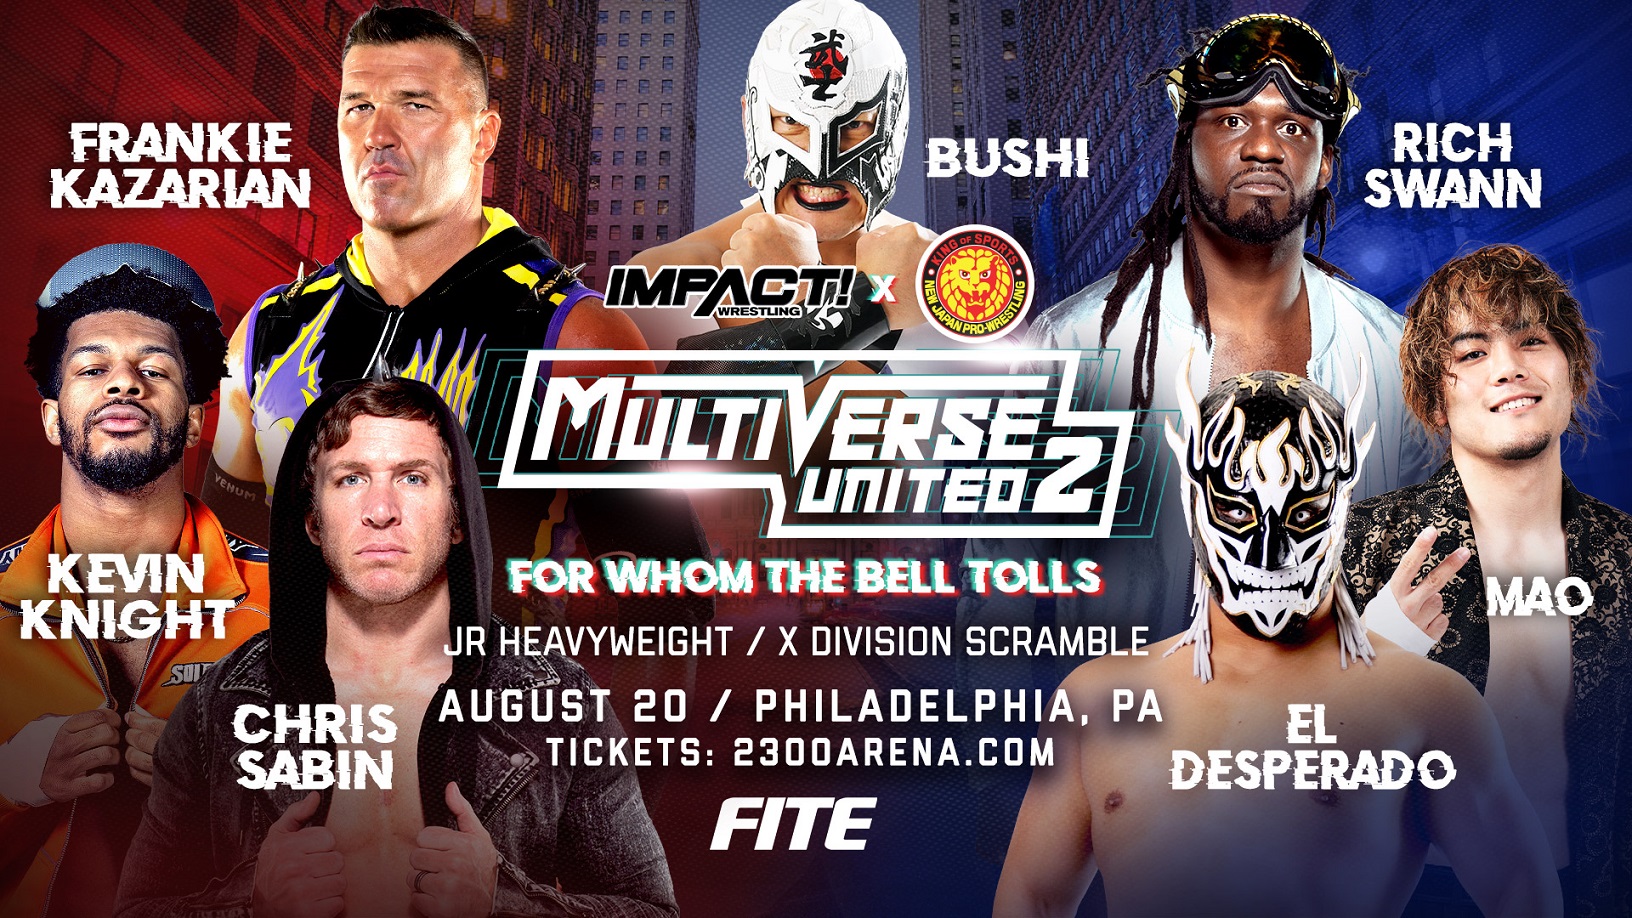 7 of NJPW & IMPACT’s Best Face Off in Jr. Heavyweight / X-Division Scramble at Multiverse United 2 – IMPACT Wrestling